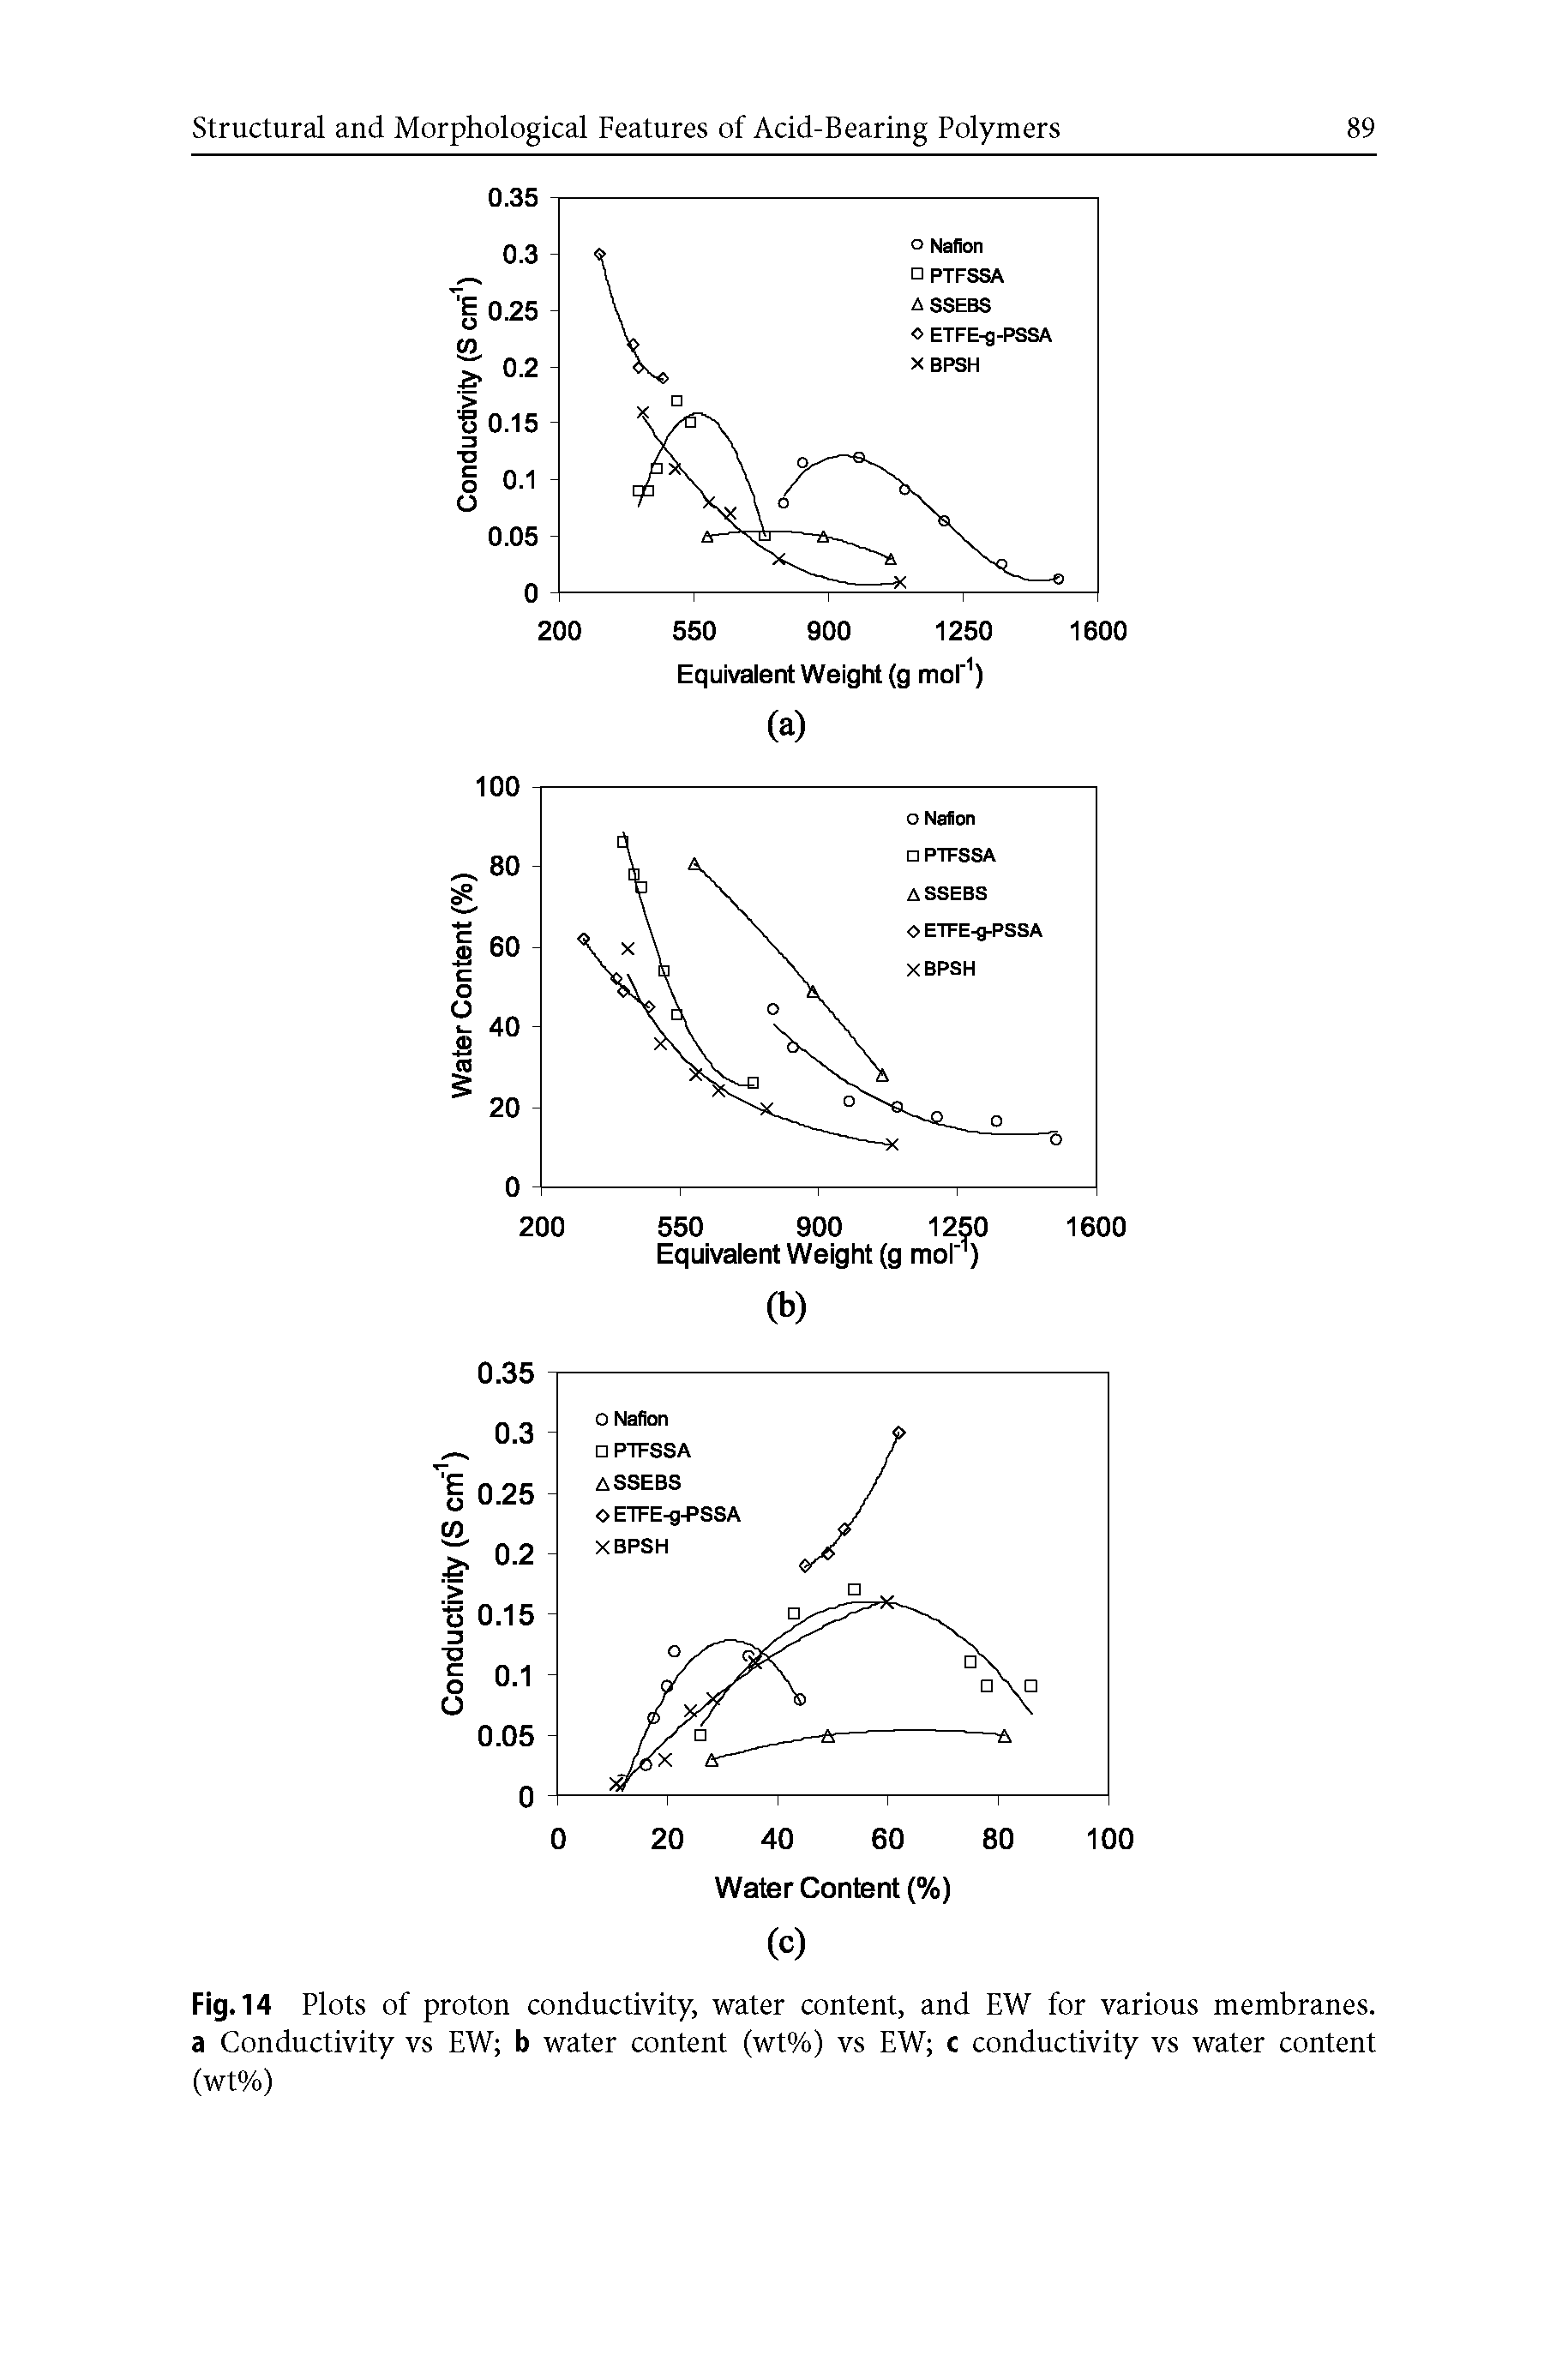 Fig. 14 Plots of proton conductivity, water content, and EW for various membranes, a Conductivity vs EW b water content (wt%) vs EW c conductivity vs water content (wt%)...